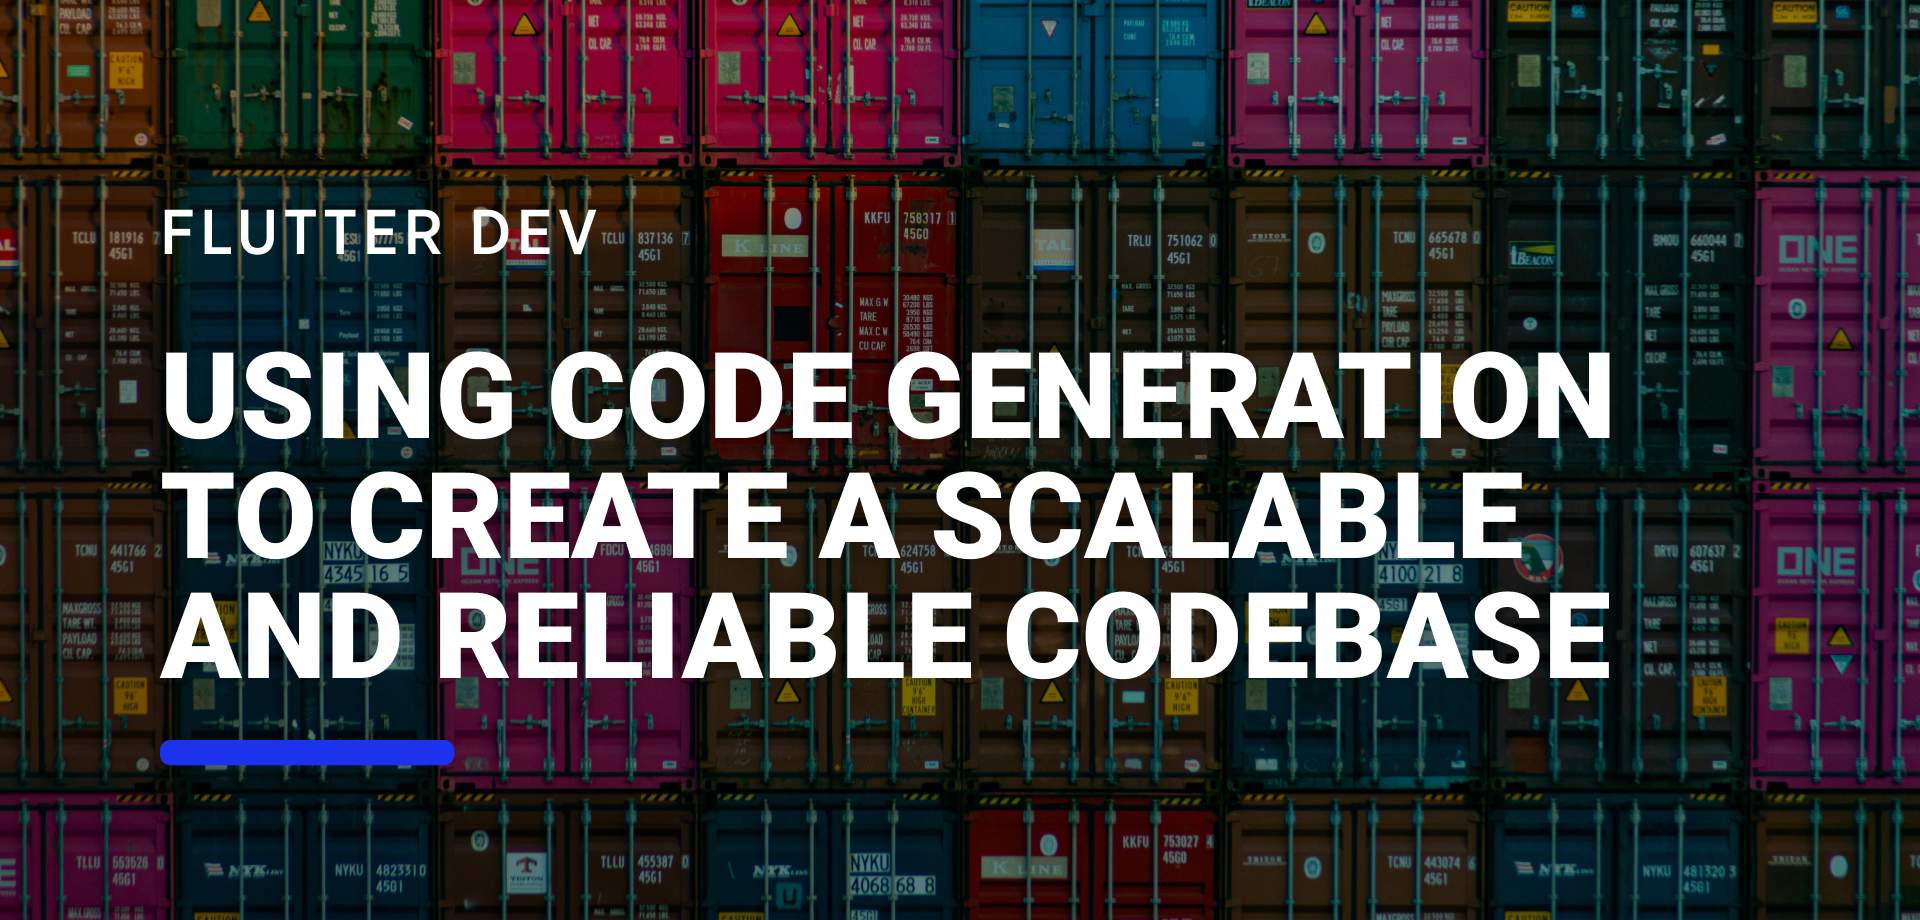 Using code generation to create a scalable and reliable codebase